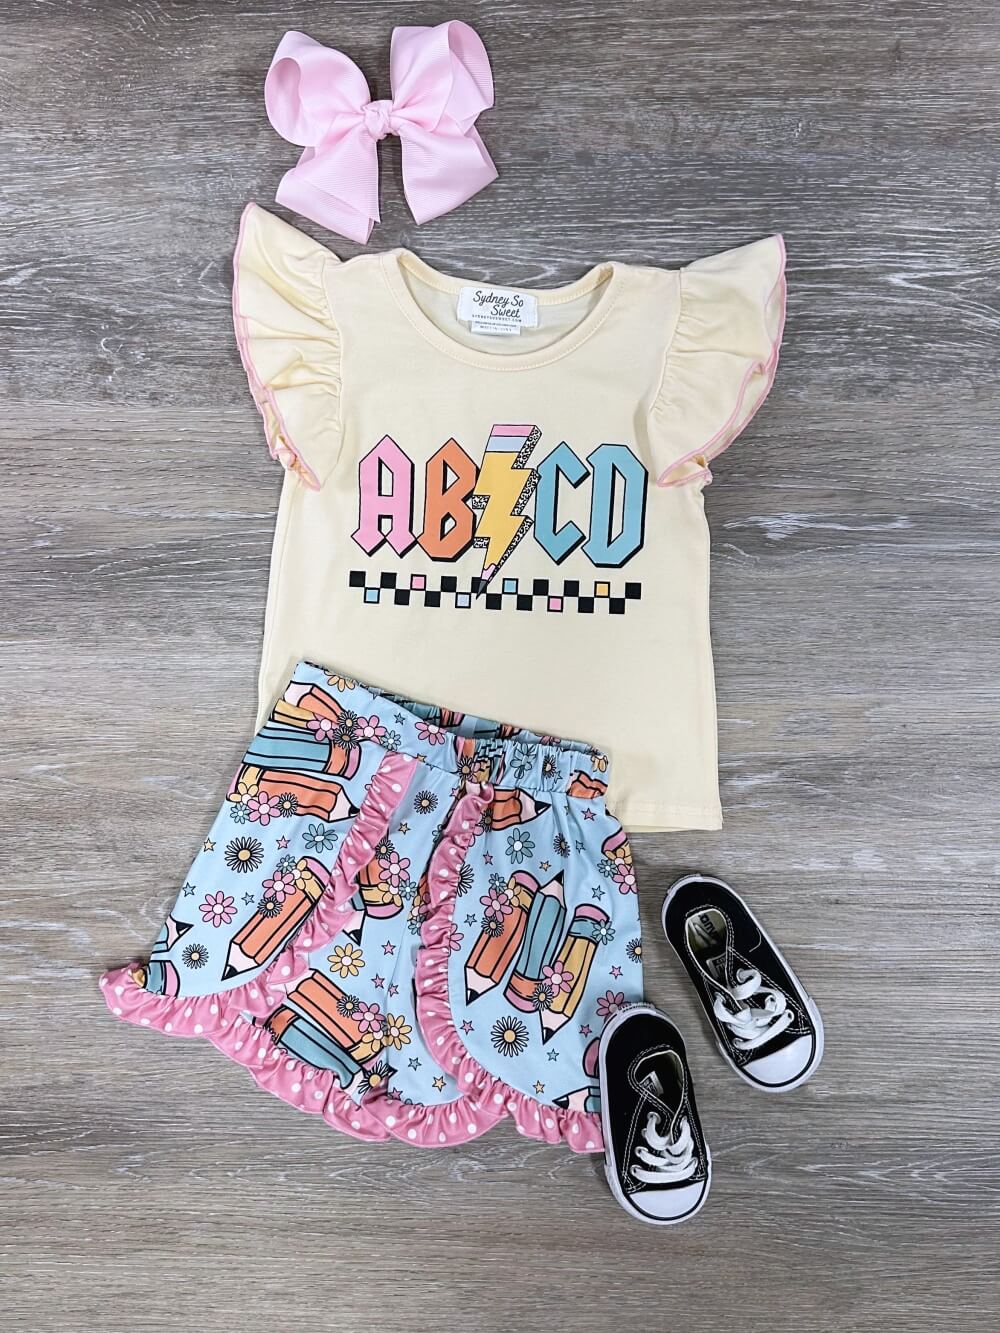 ABCD Rocker Girl Back to School Shorts Outfit - Sydney So Sweet